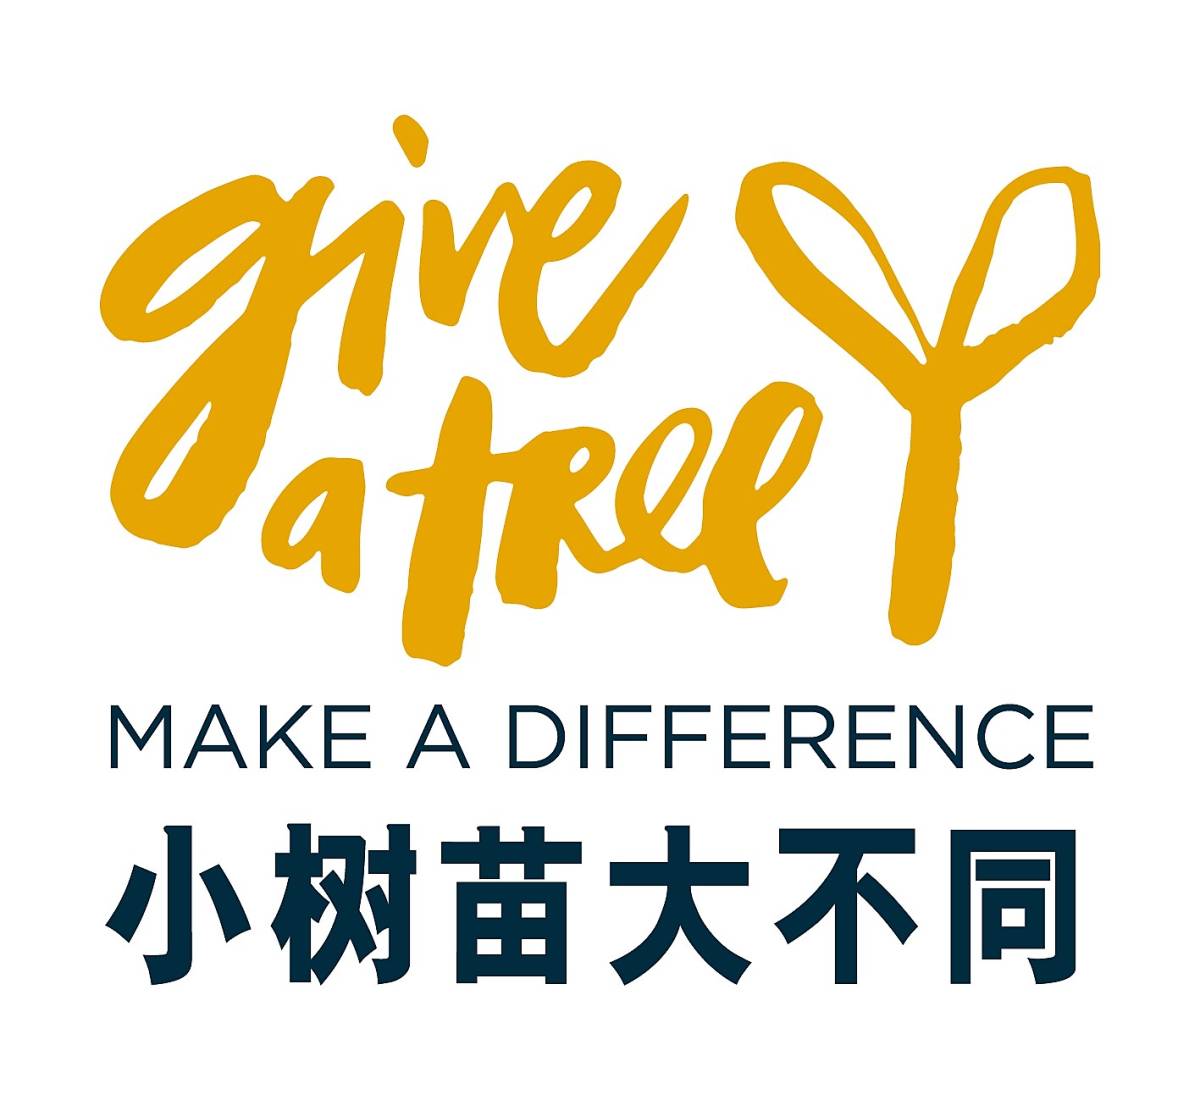 AccorHotels Launches Give a Tree campaign in Greater China